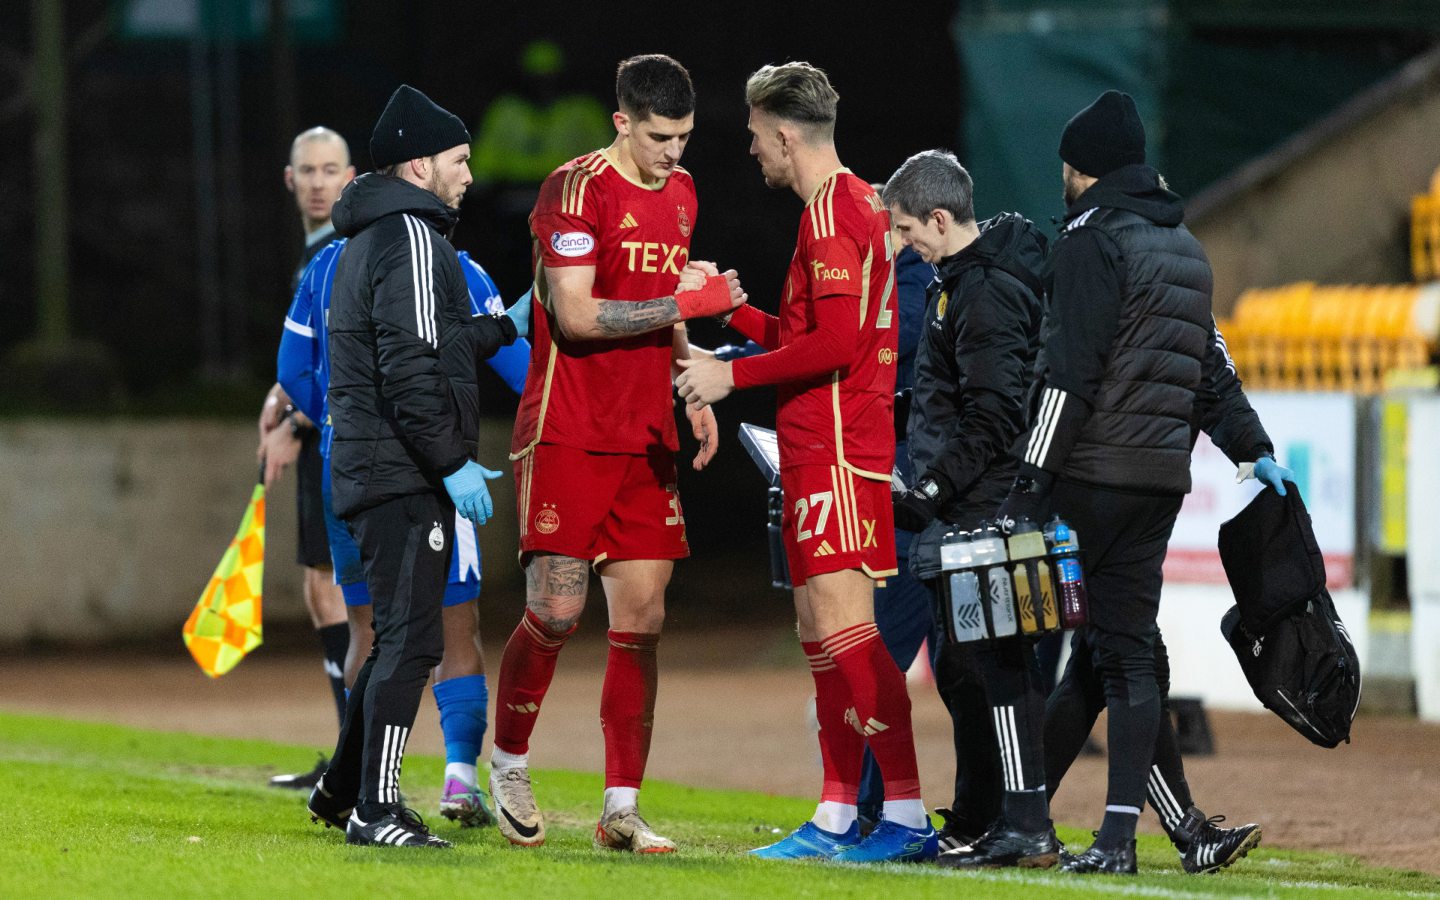 Aberdeen's Slobodan Rubezic (L) is replaced by Angus MacDonald (R) because of an injury against St Johnstone. Image: SNS 